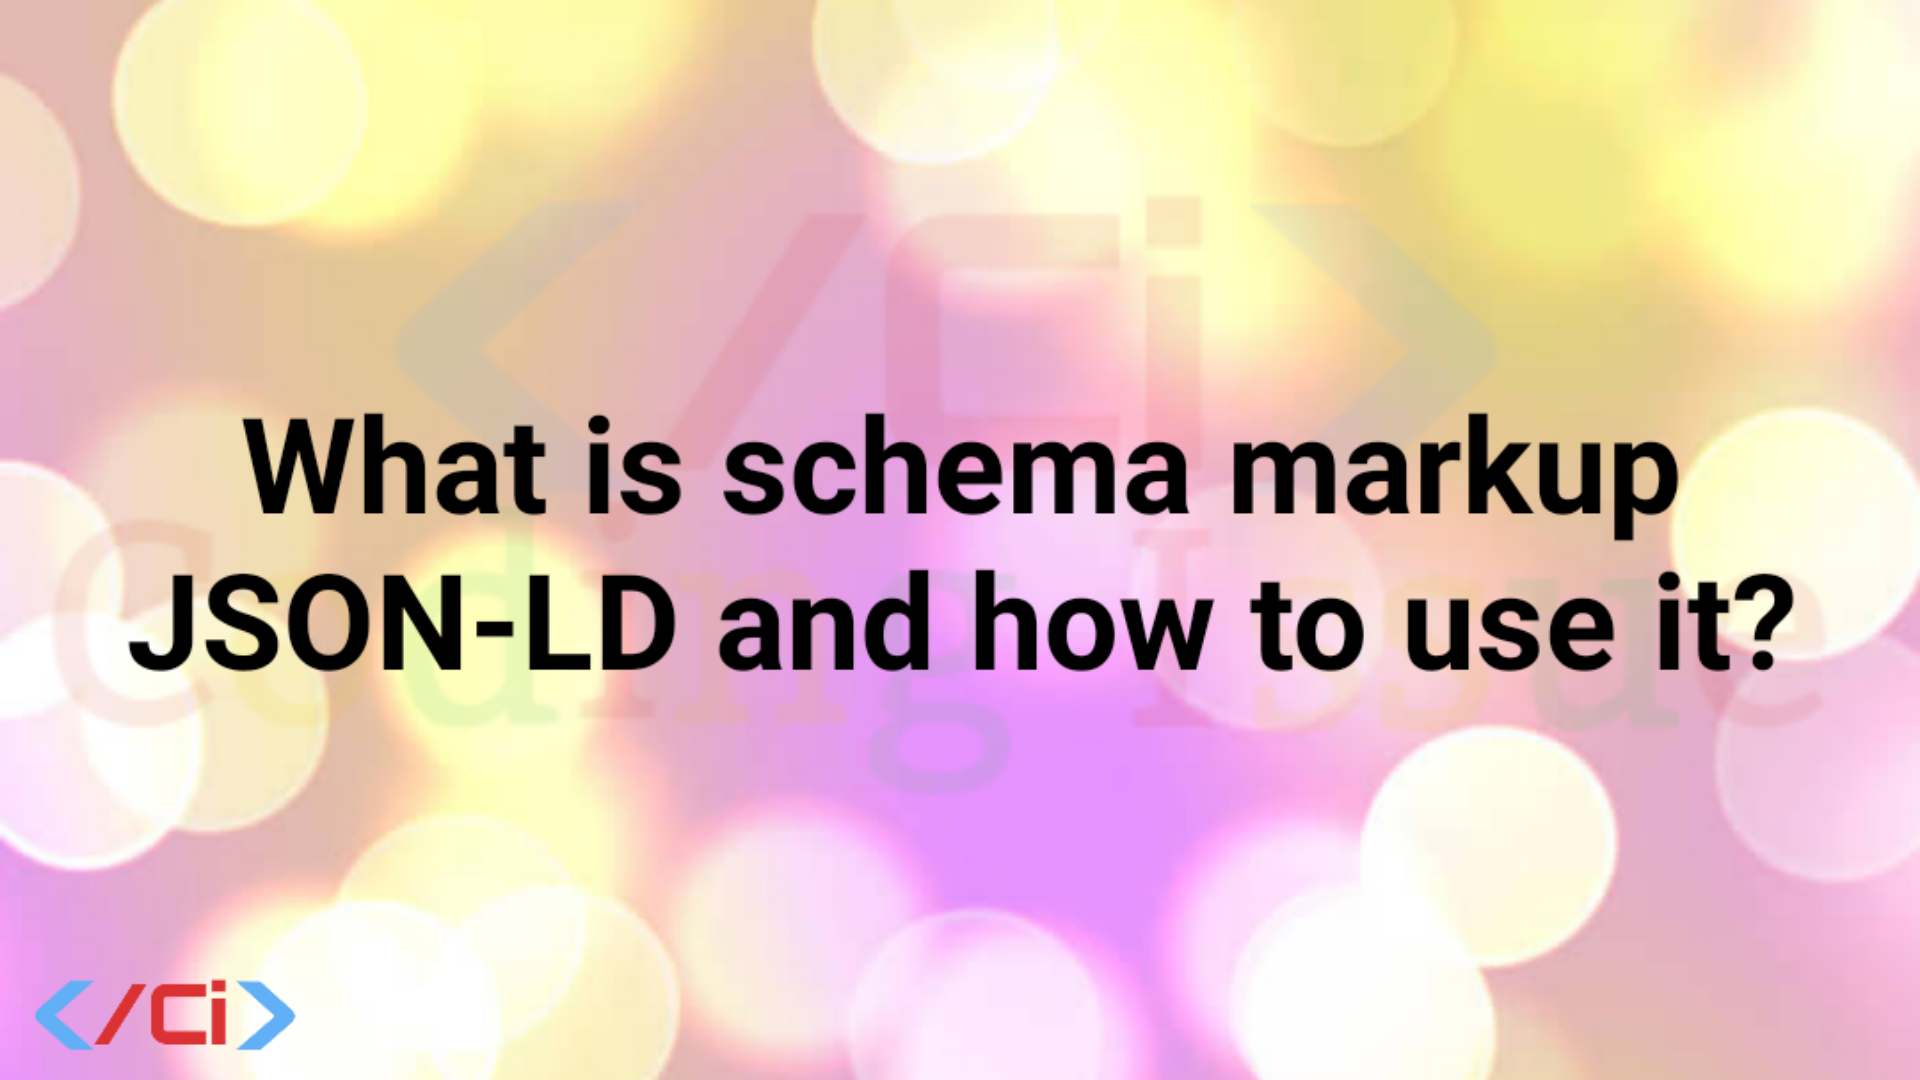 What is schema markup JSON-LD and how to use it?